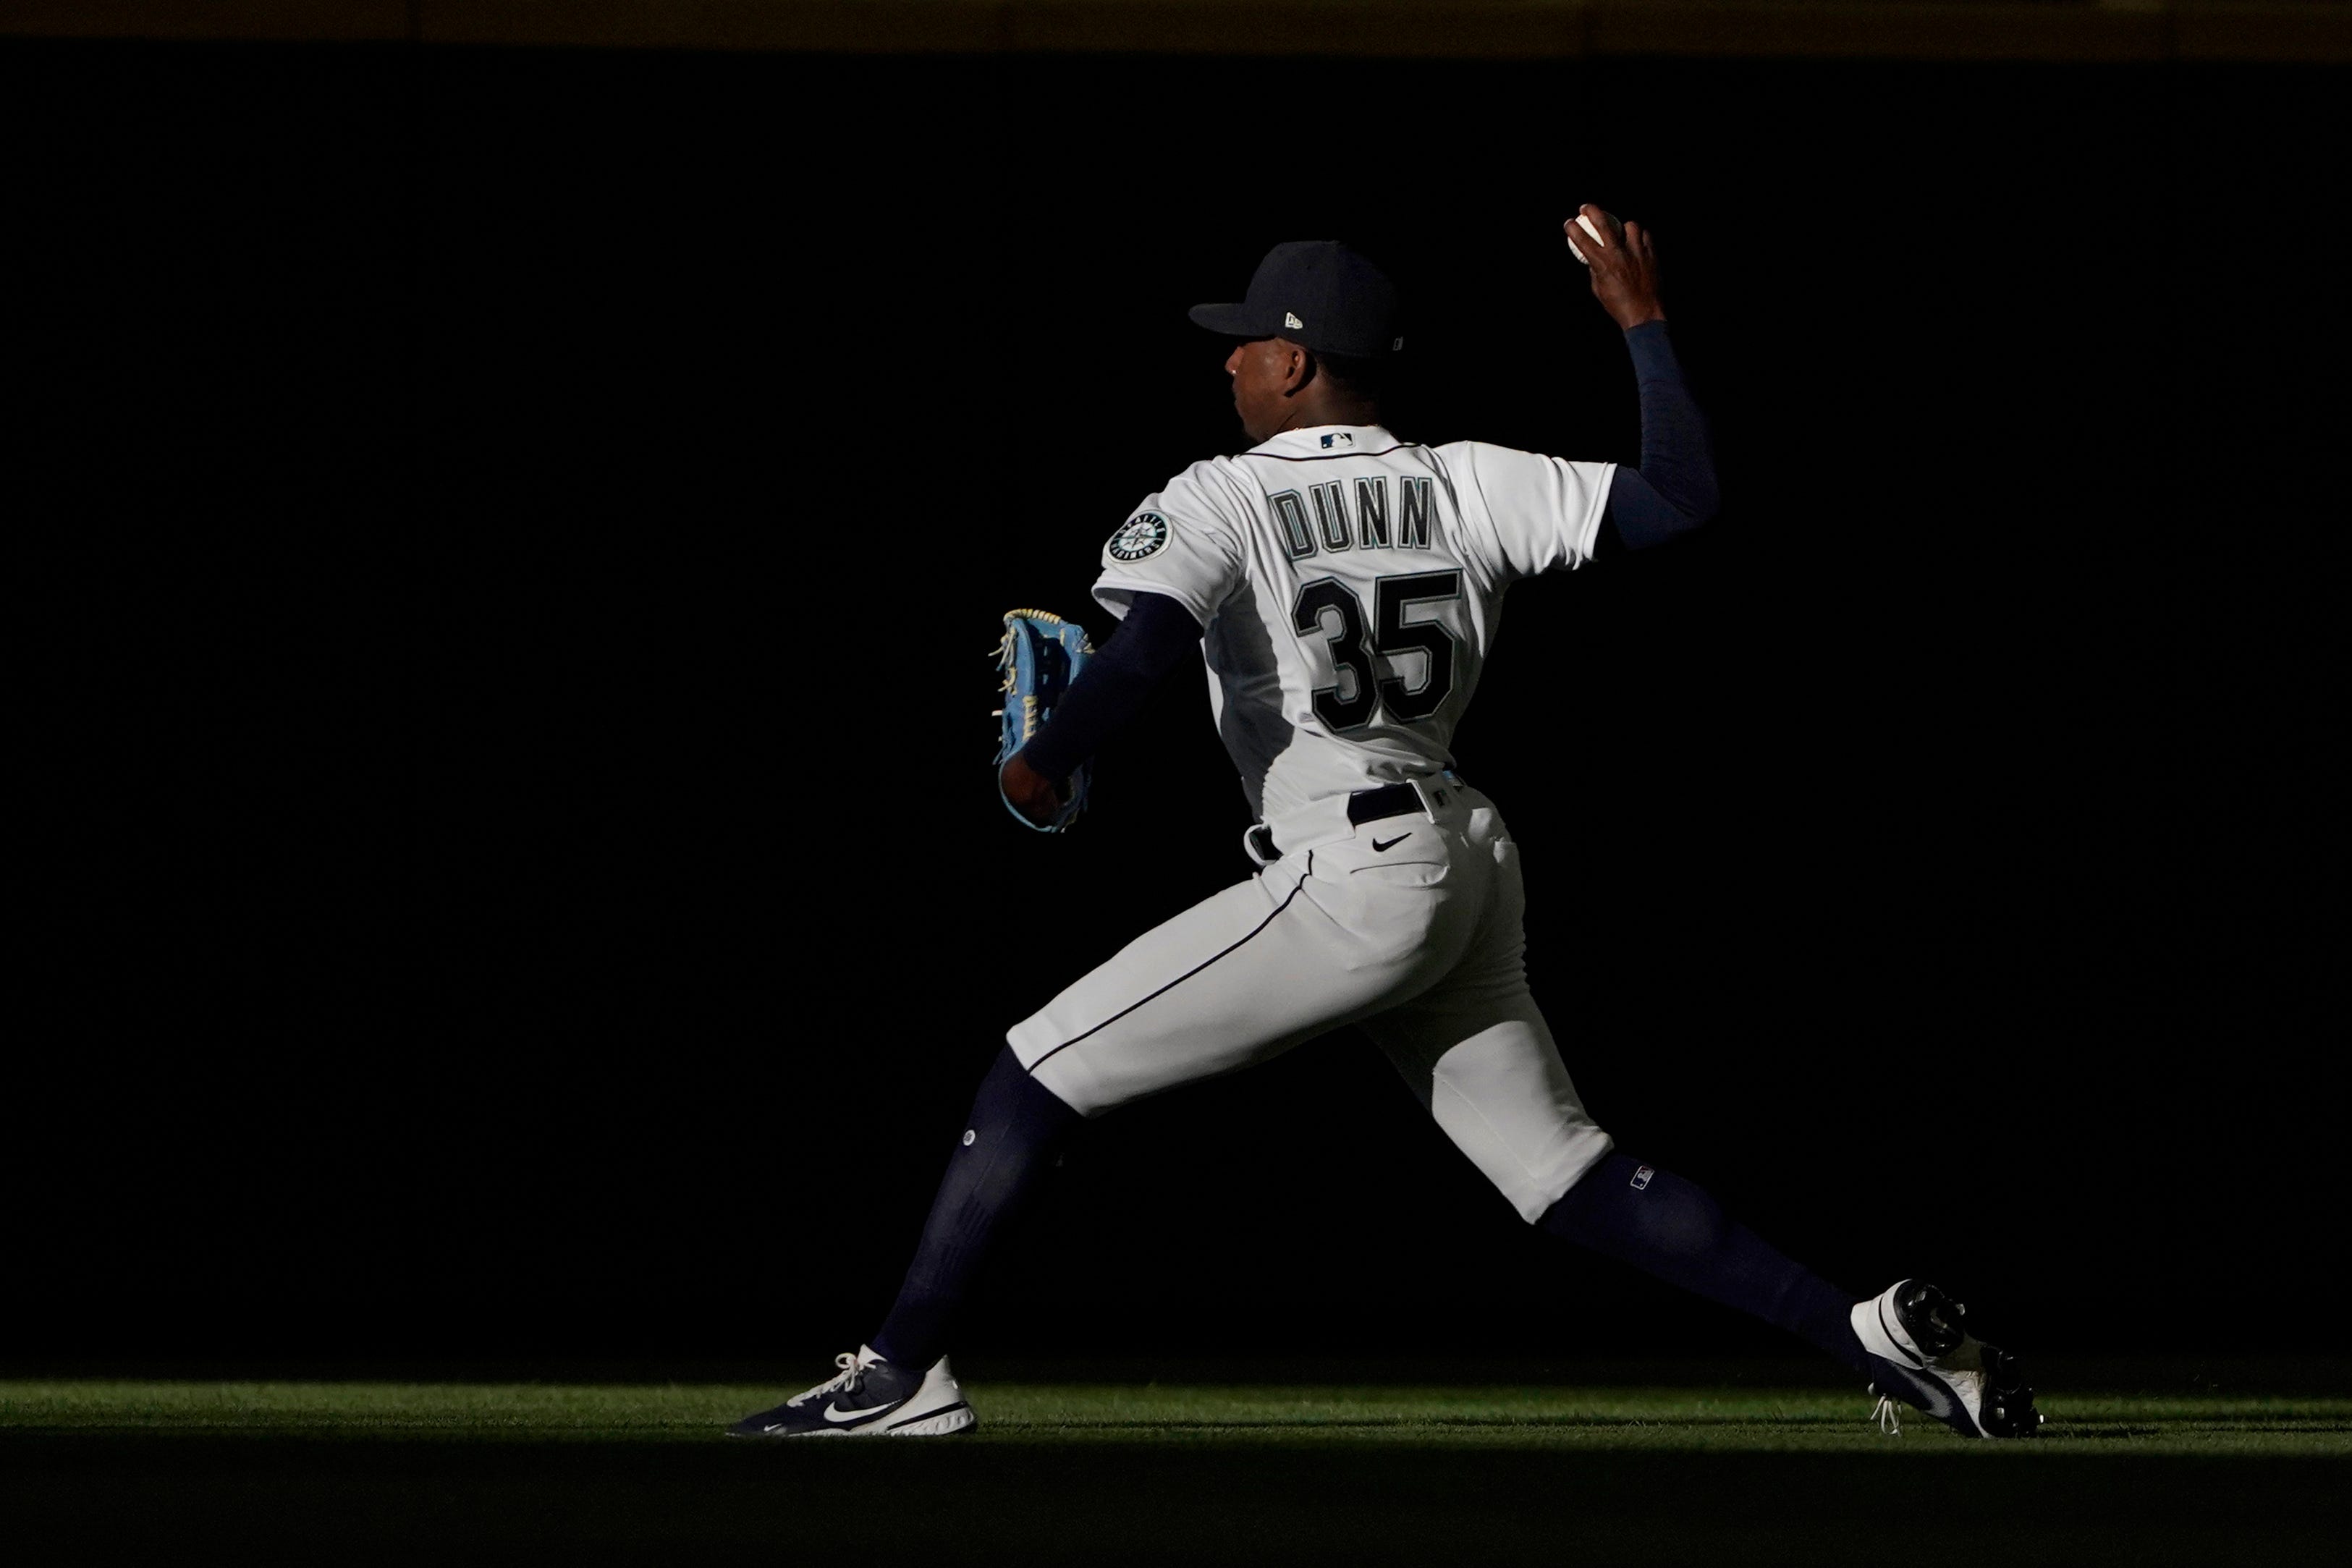 Seattle Mariners starting pitcher Justin Dunn warms up in a section of sunlight with the roof at the stadium extended, before the team's baseball game against the Detroit Tigers, Tuesday, May 18, 2021, in Seattle.